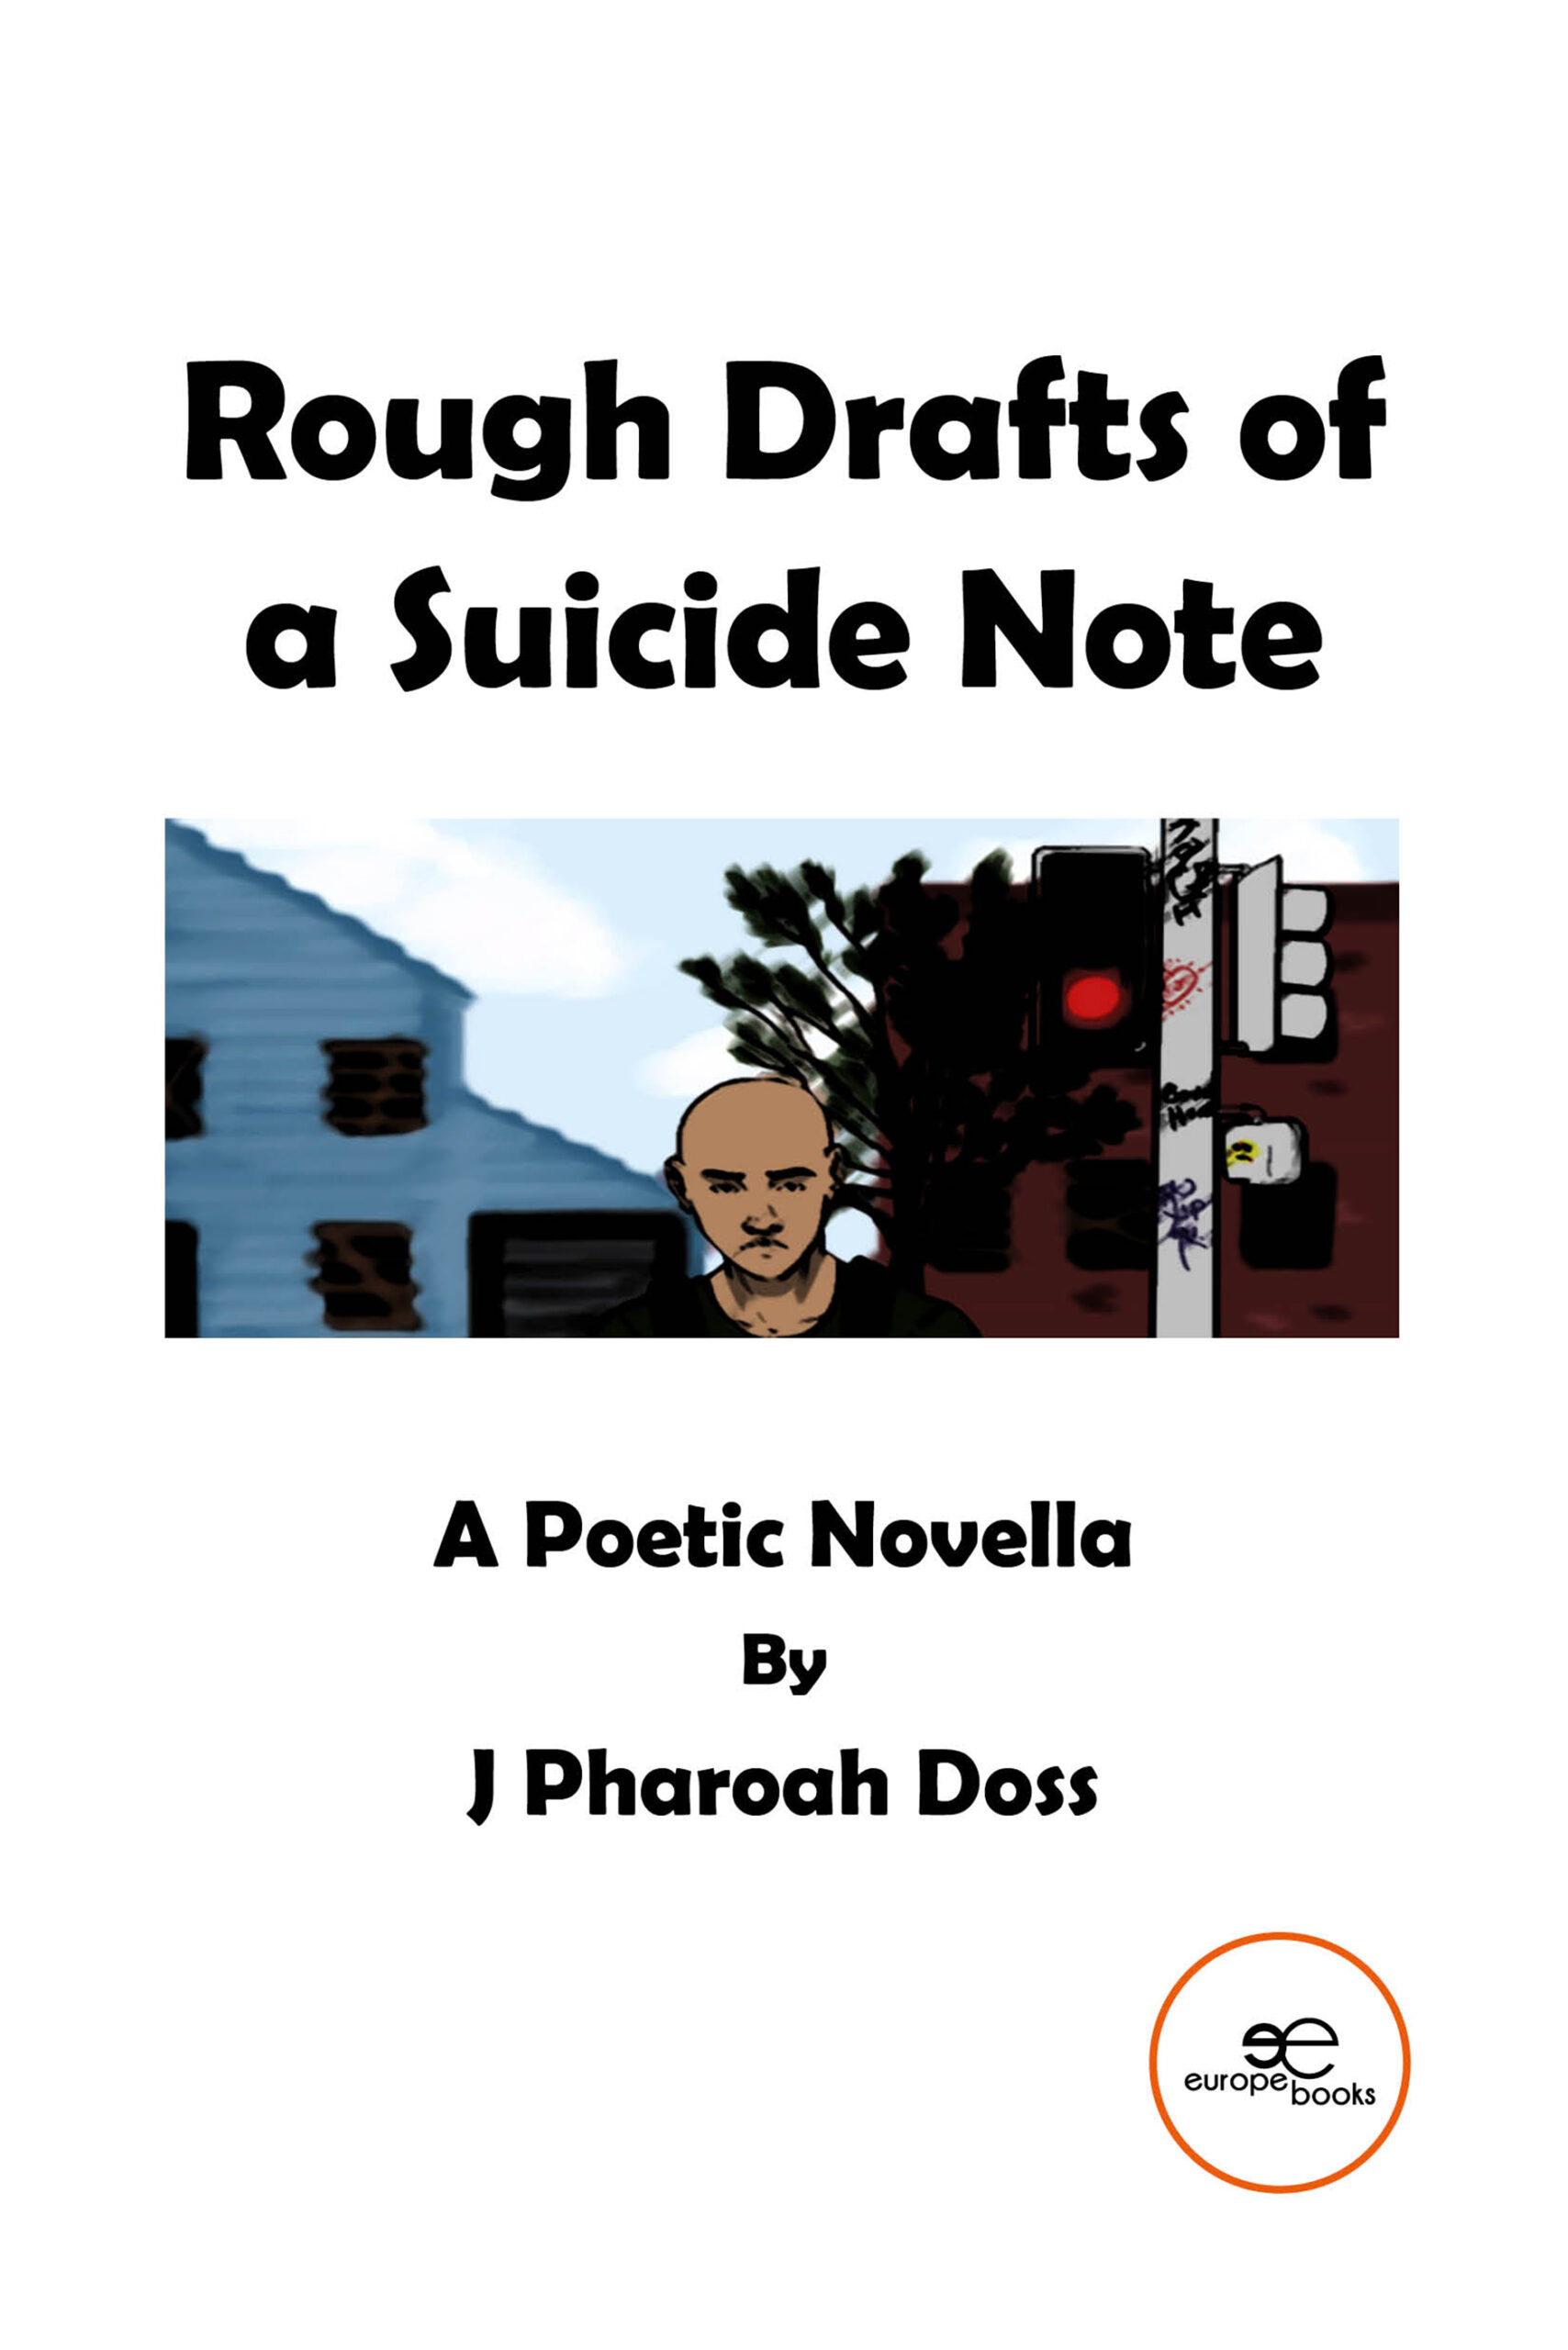 ROUGH DRAFTS OF A SUICIDE NOTE – J. Pharoah Doss